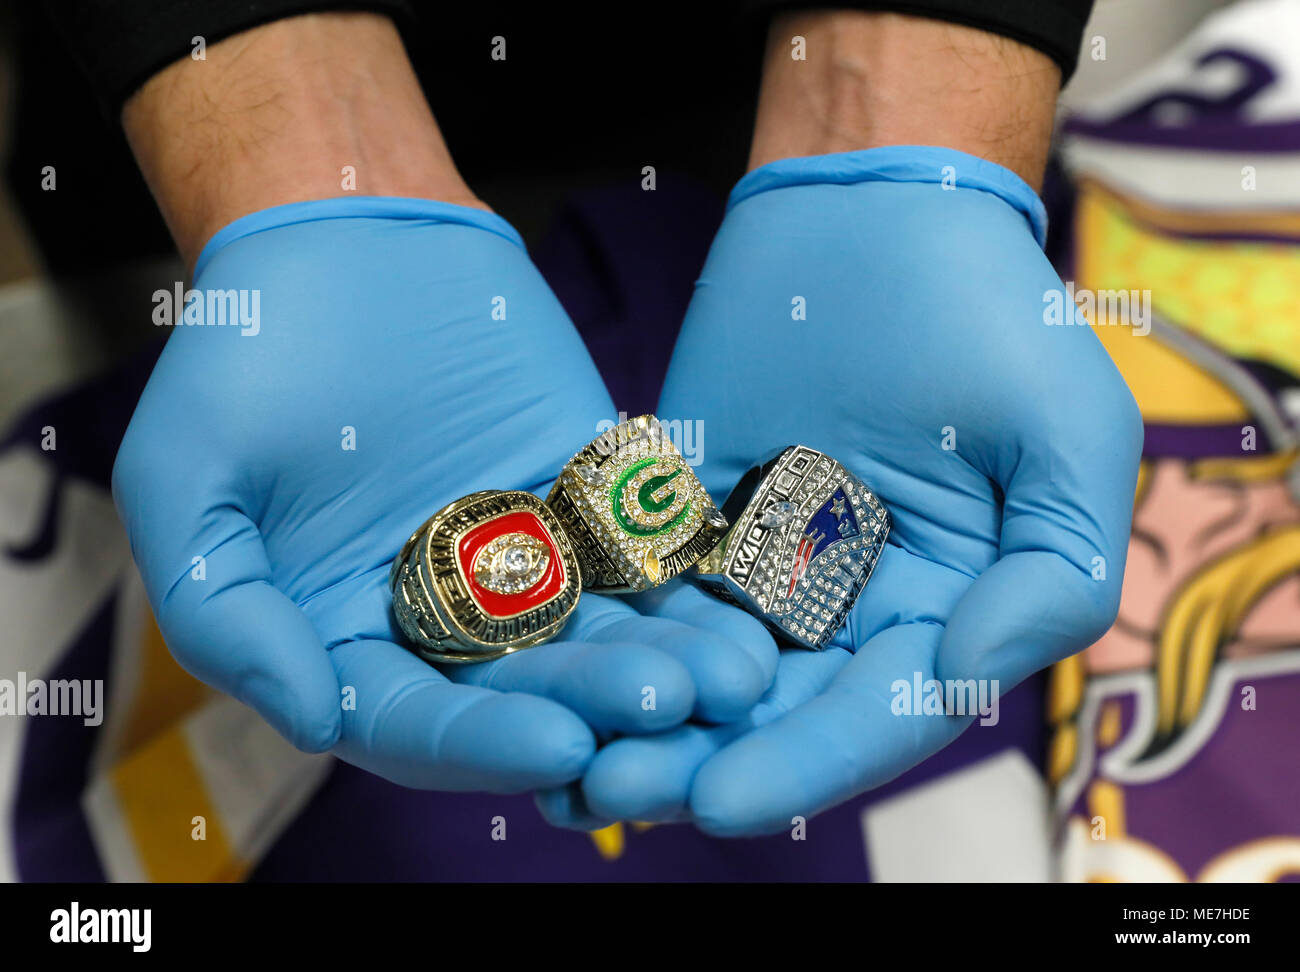 A U.S. Customs and Border Protection officer shows confiscated counterfeit Super Bowl rings January 31, 2018 in Minneapolis, Minnesota.    (photo by Glenn Fawcett via Planetpix) Stock Photo